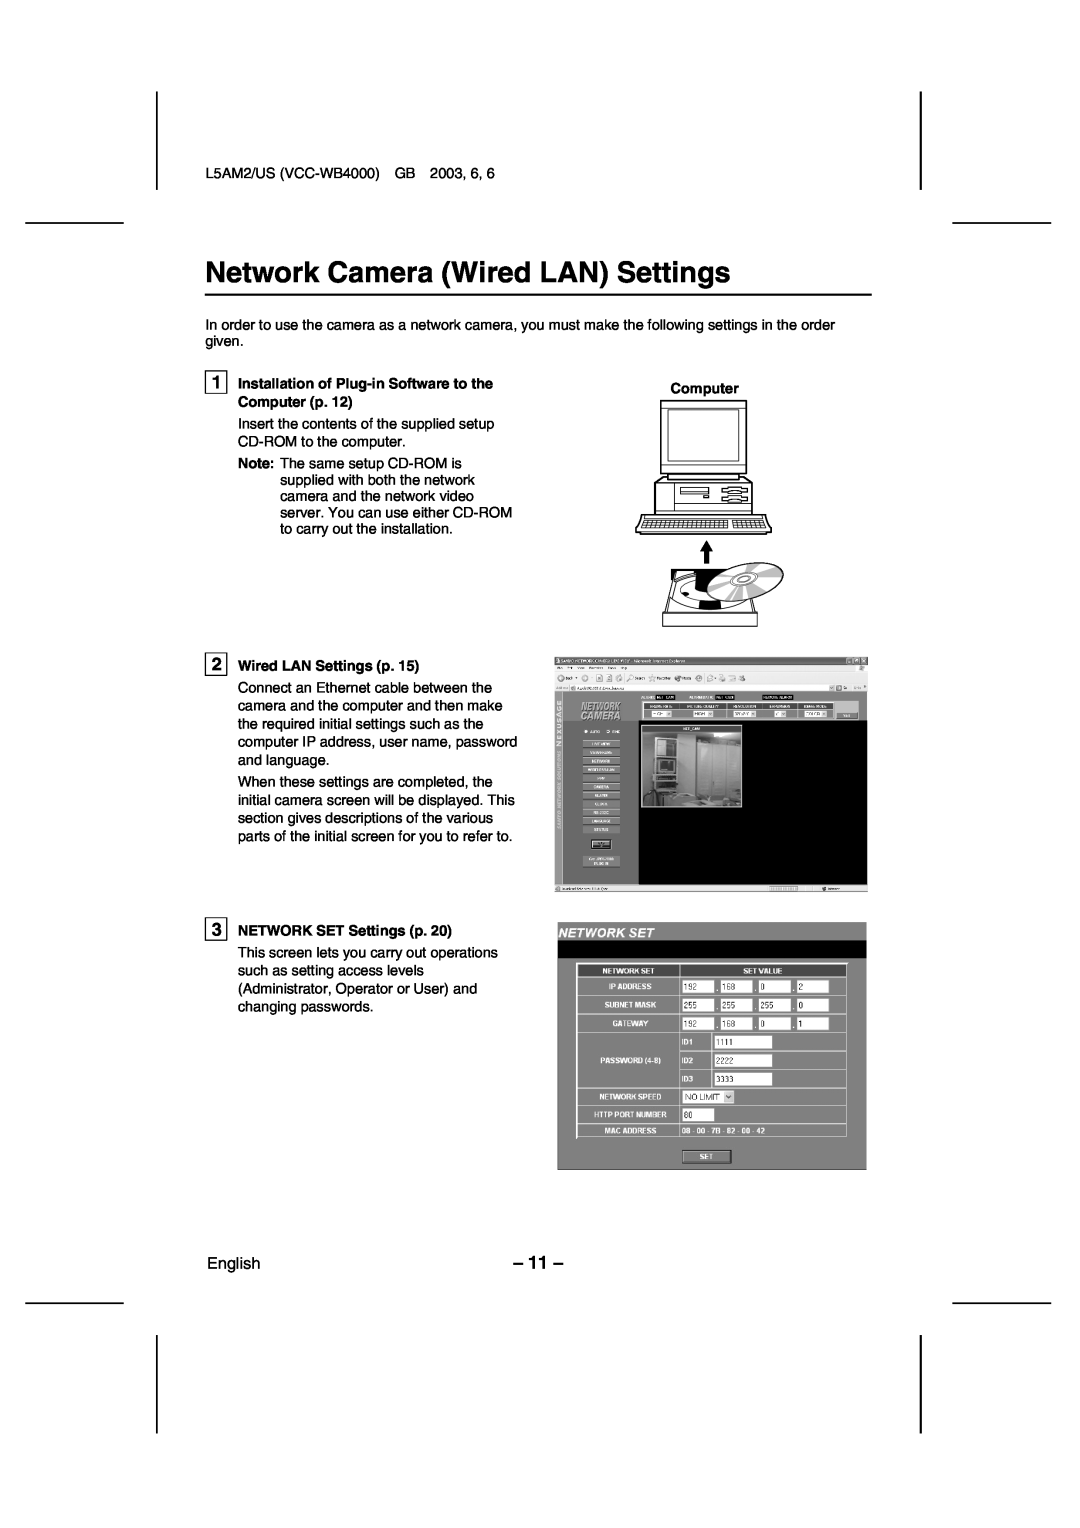 Sanyo VCC-WB4000 Network Camera Wired LAN Settings, Installation of Plug-in Software to the Computer p, English 